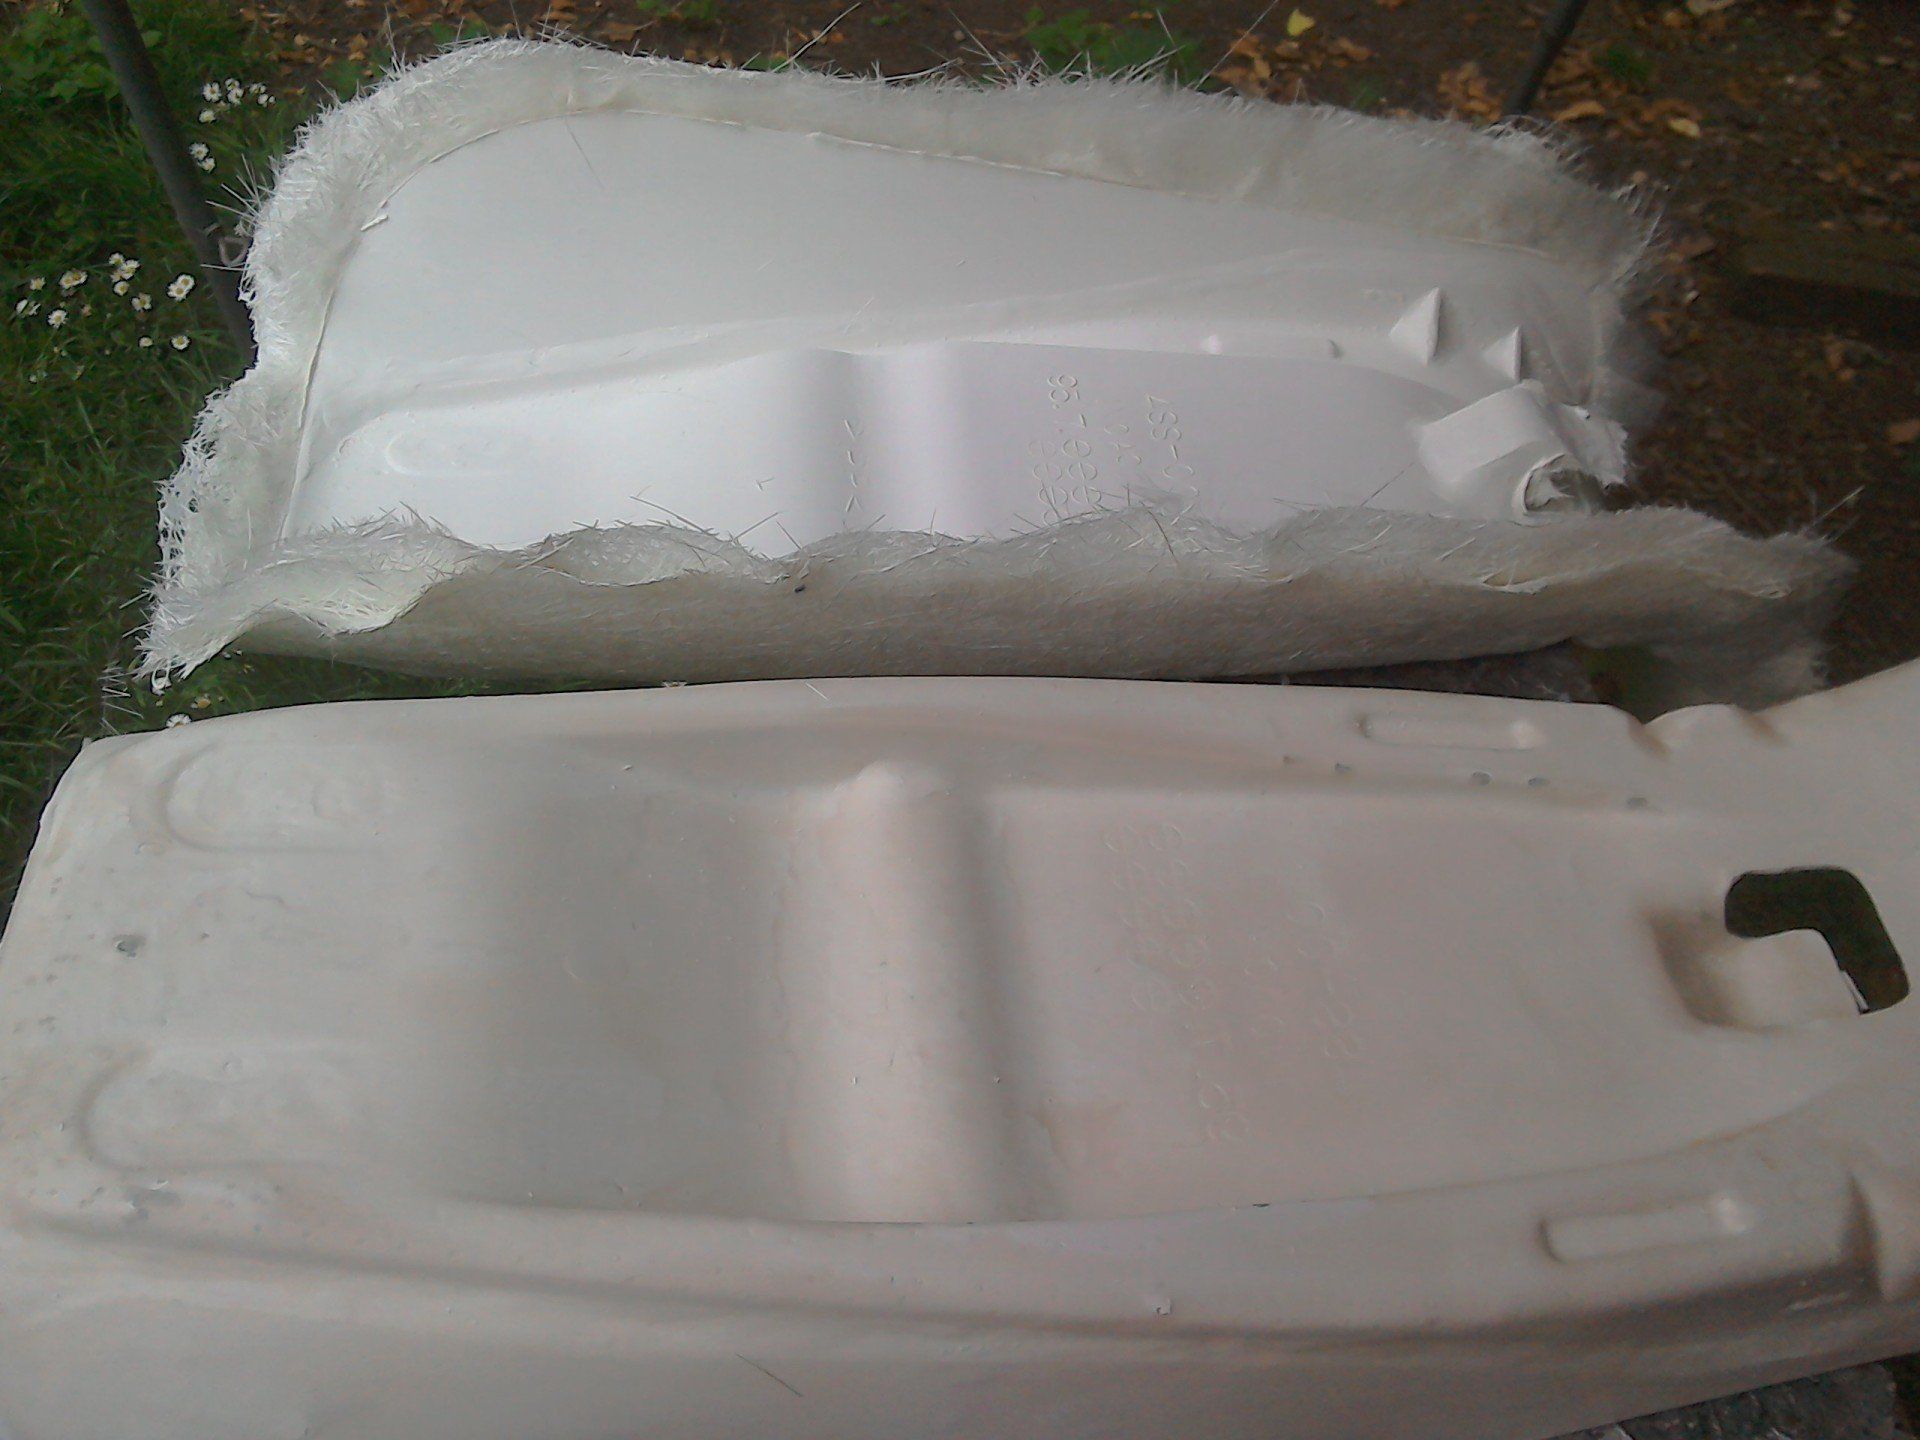 Fibreglass seat base released from mould